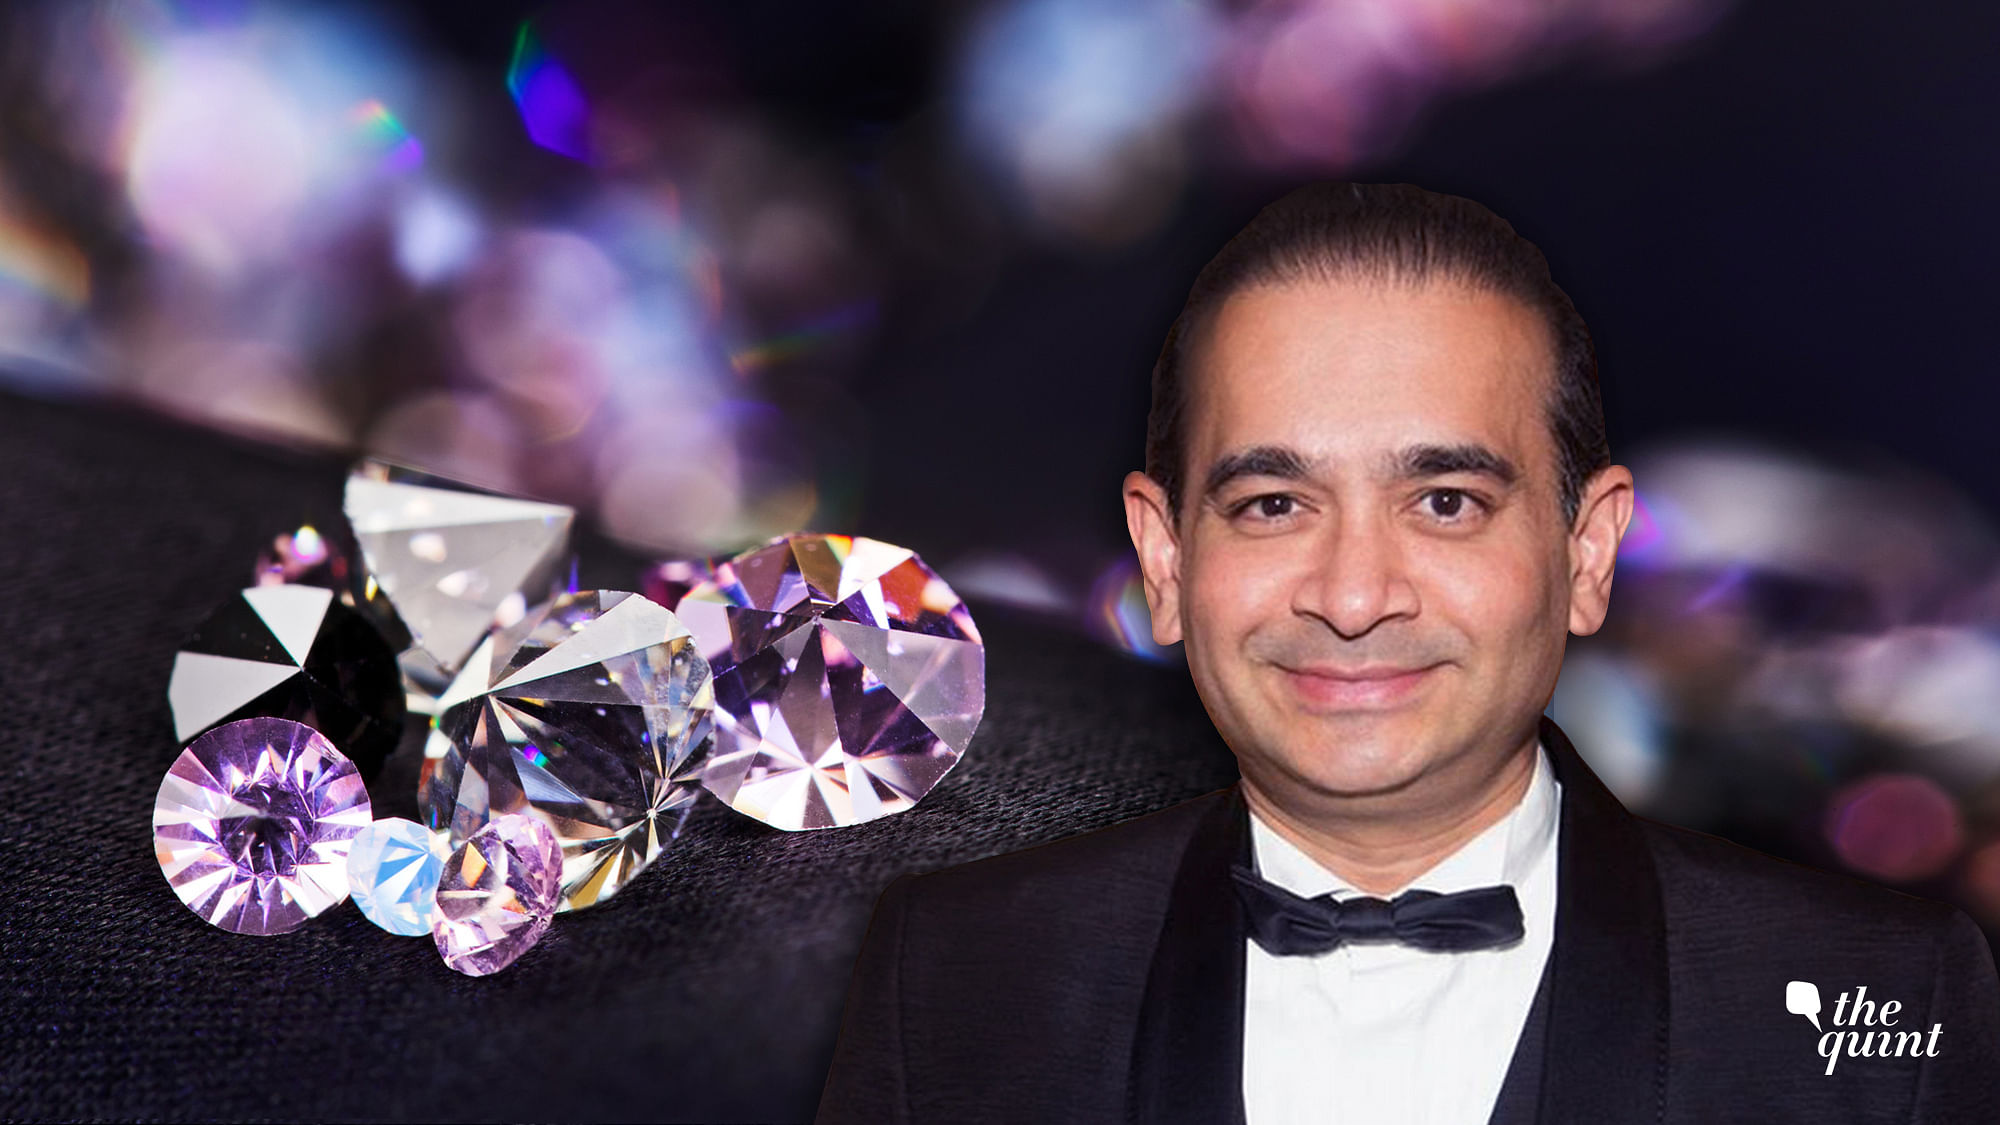 Nirav Modi has been behind bars at the Wandsworth Prison in southwest London since his arrest last year, following India’s extradition request.